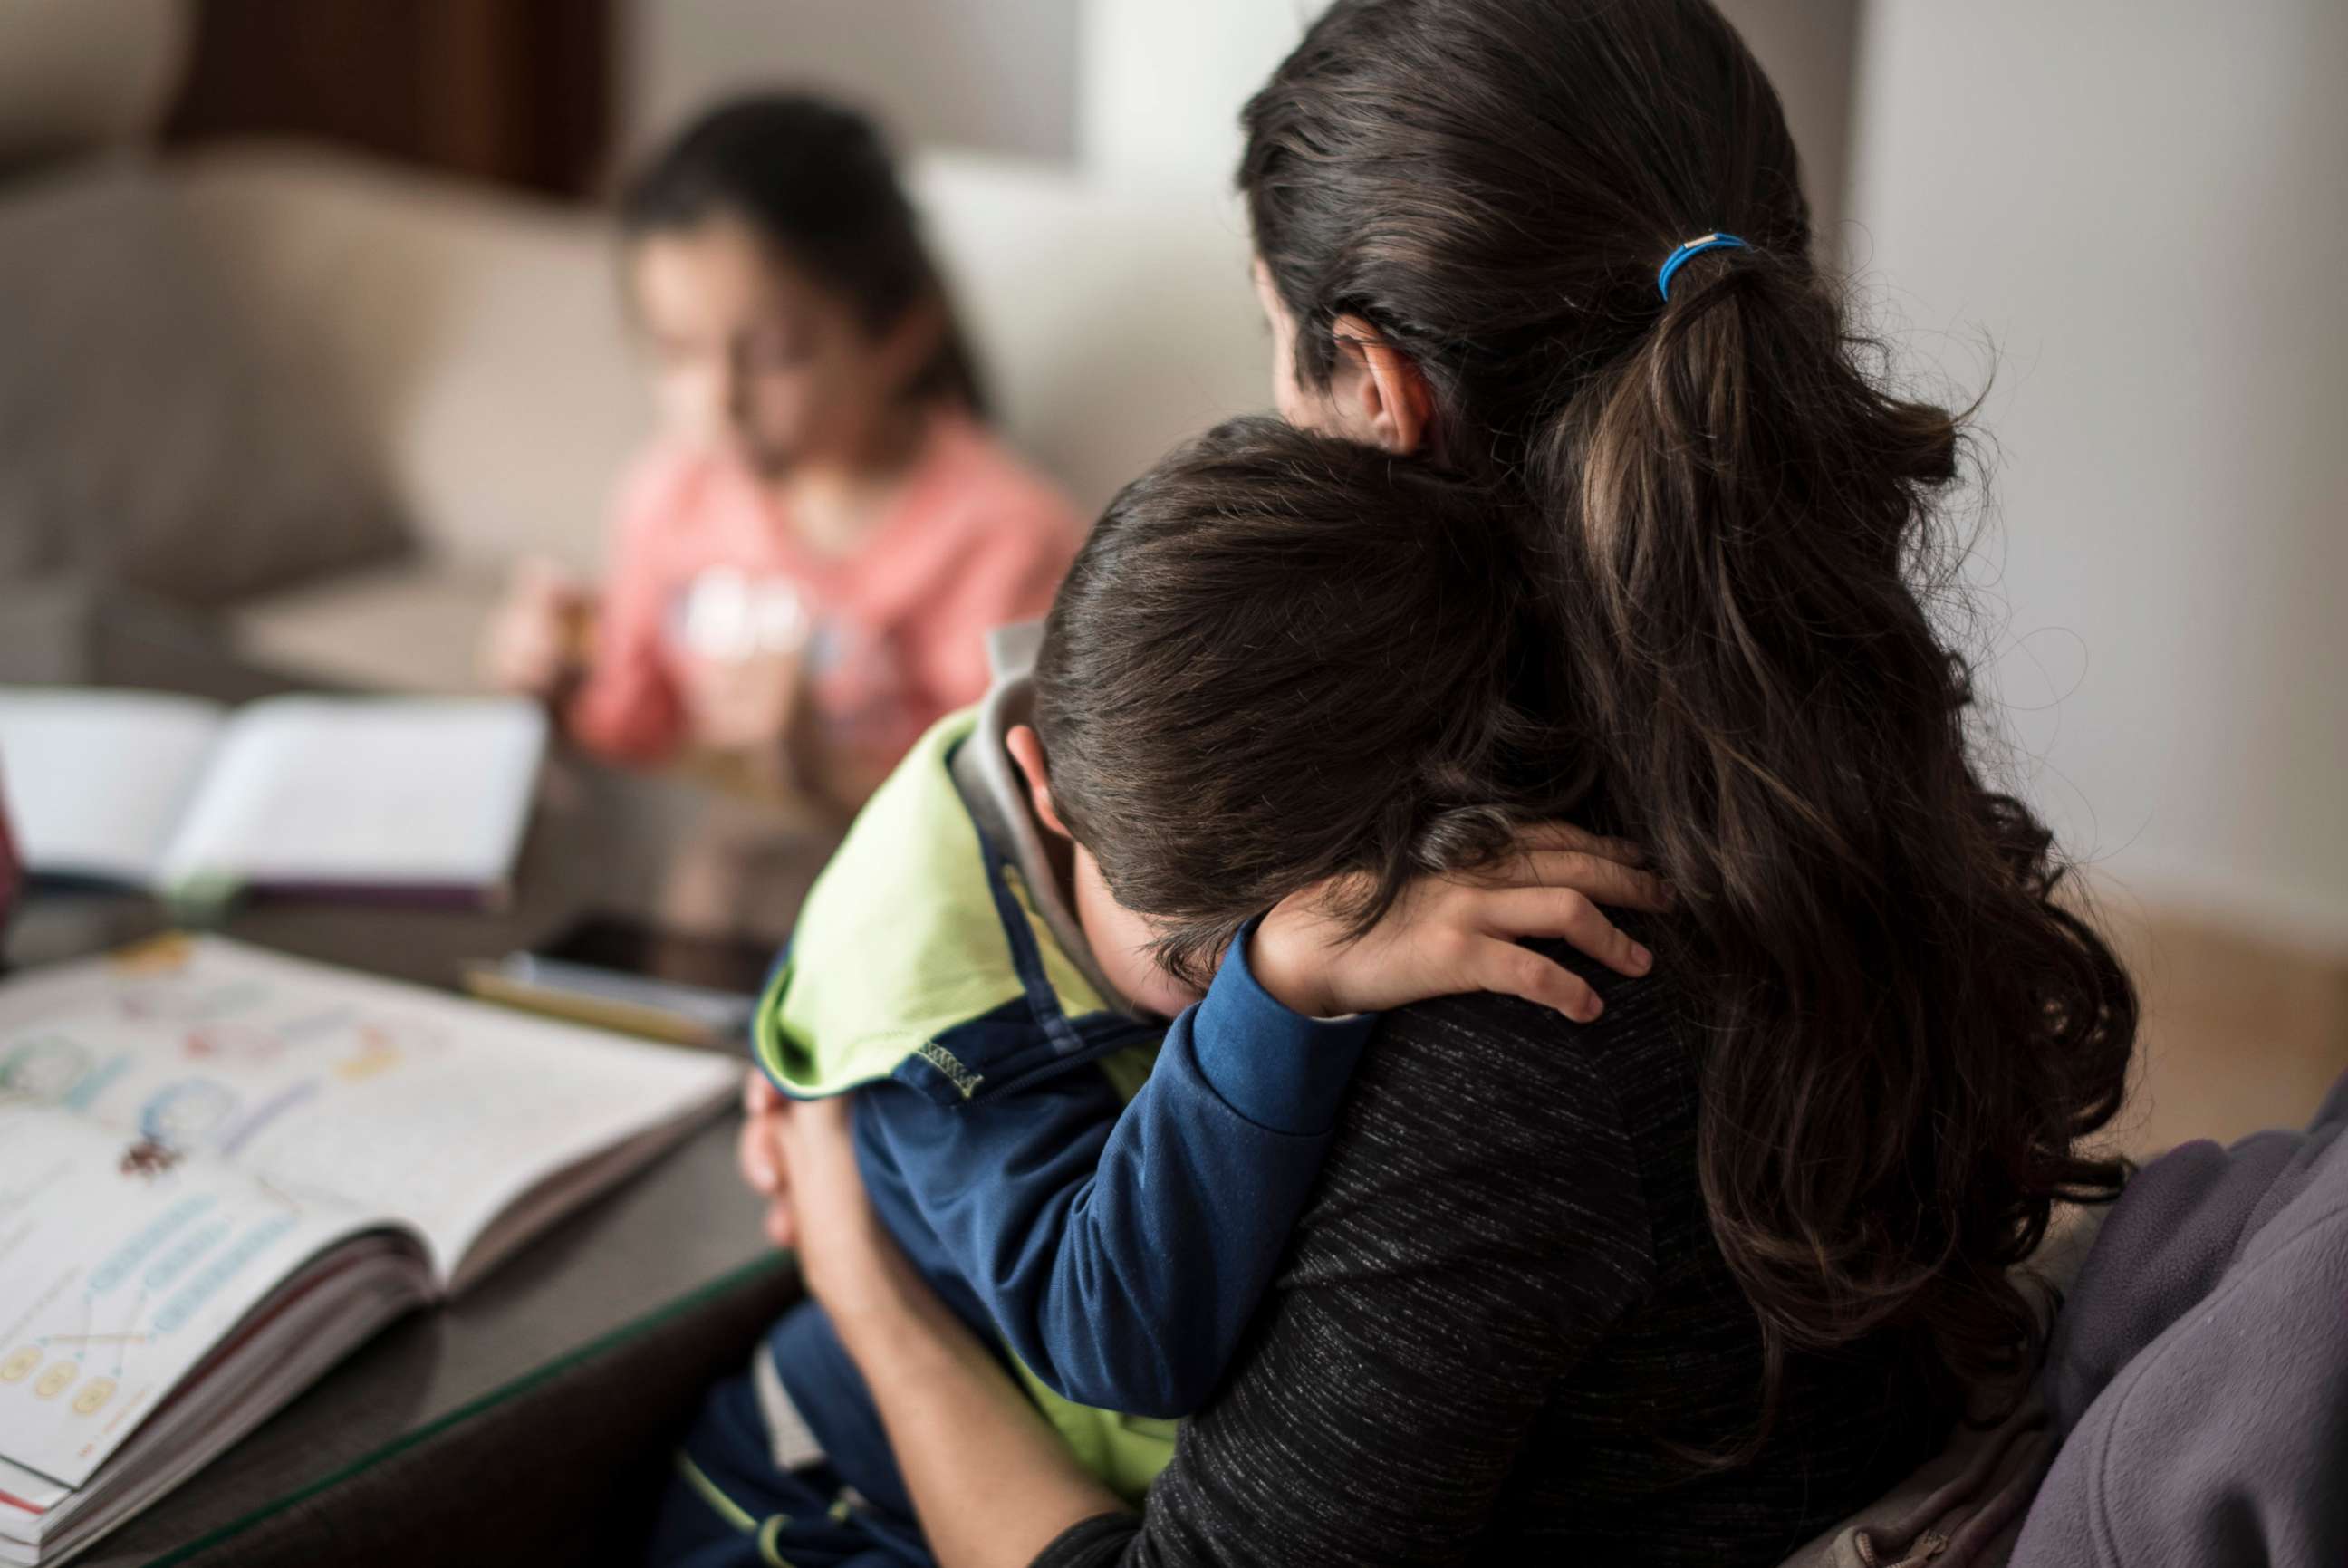 PHOTO: A mother comforts her crying son while in the background her daughter performs homework.